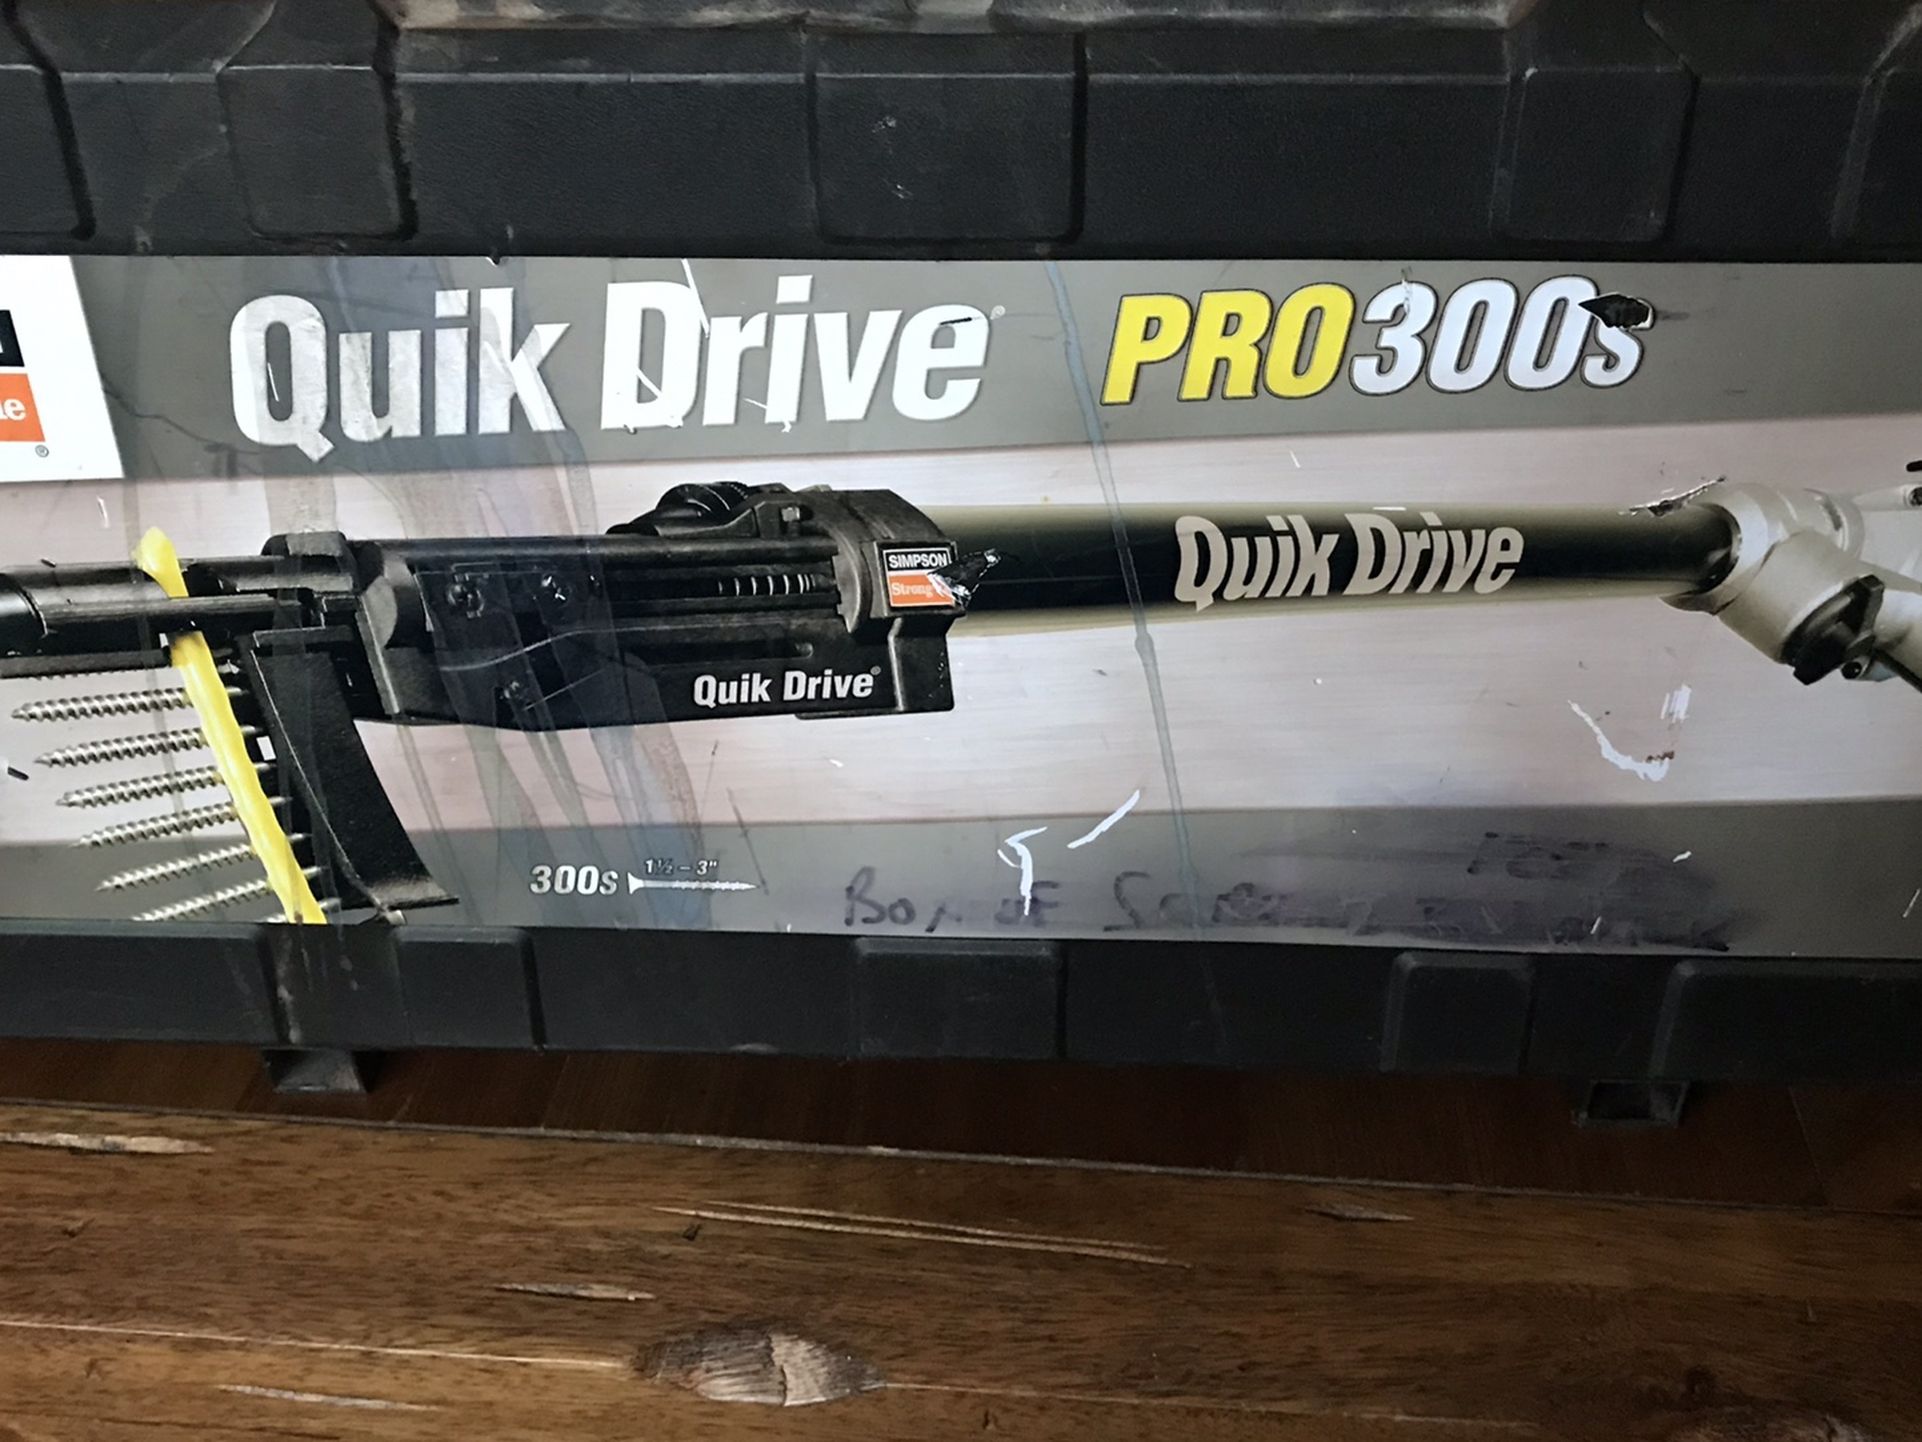 Quick Drive Pro300s Can Use 1 1/2”-3” Screws Paid $460 Asking $250